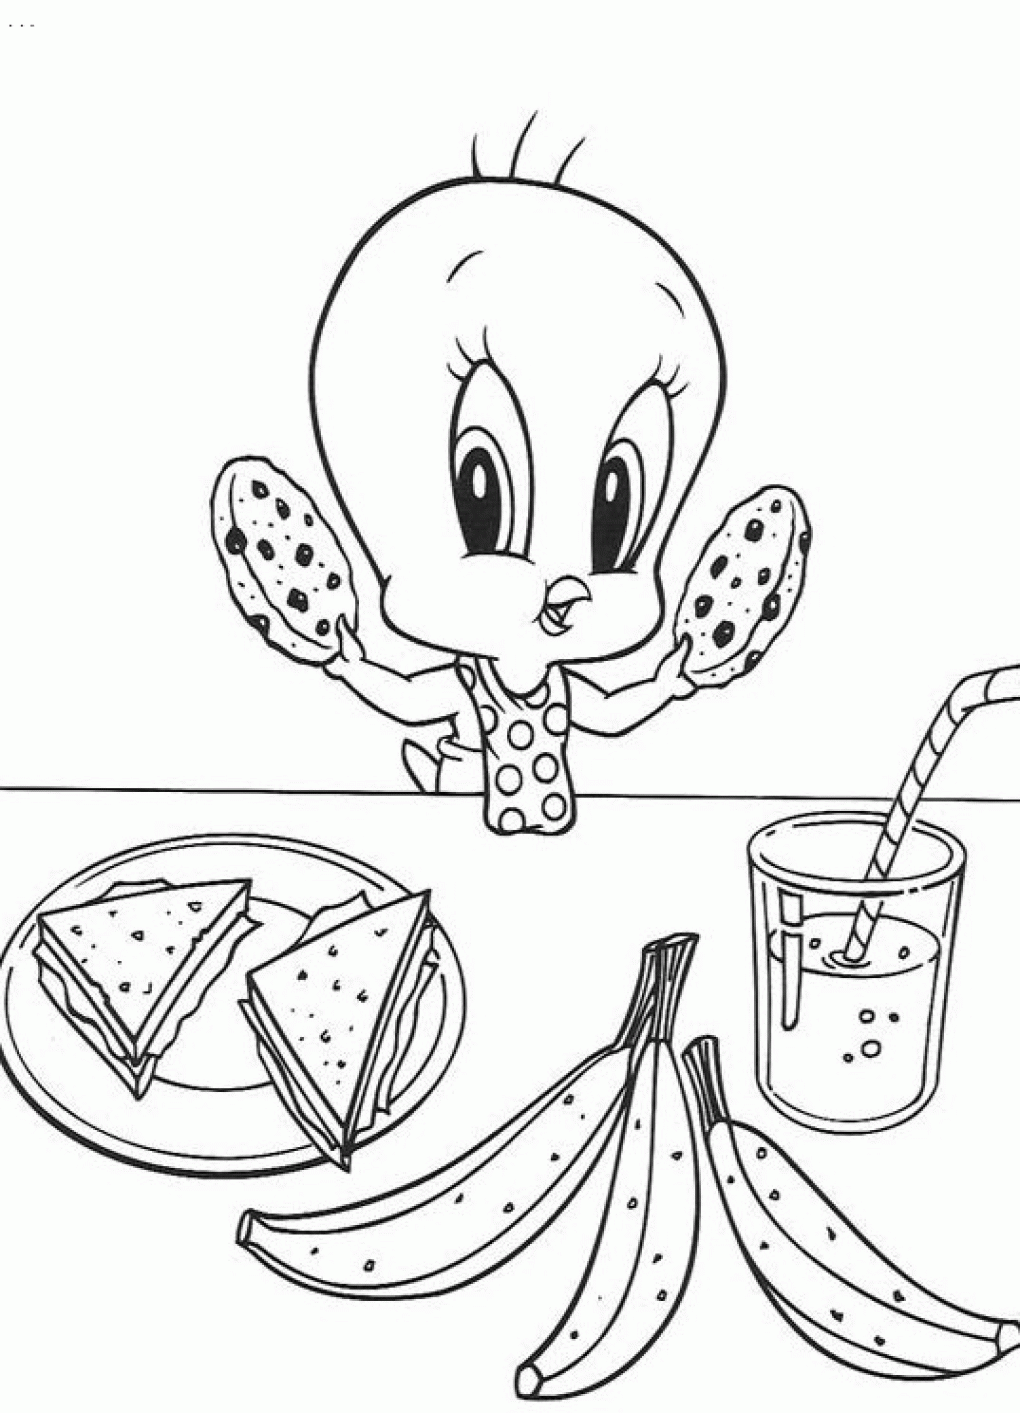 Really Nice Baby Looney tunes Coloring pages | ColoringPagehub